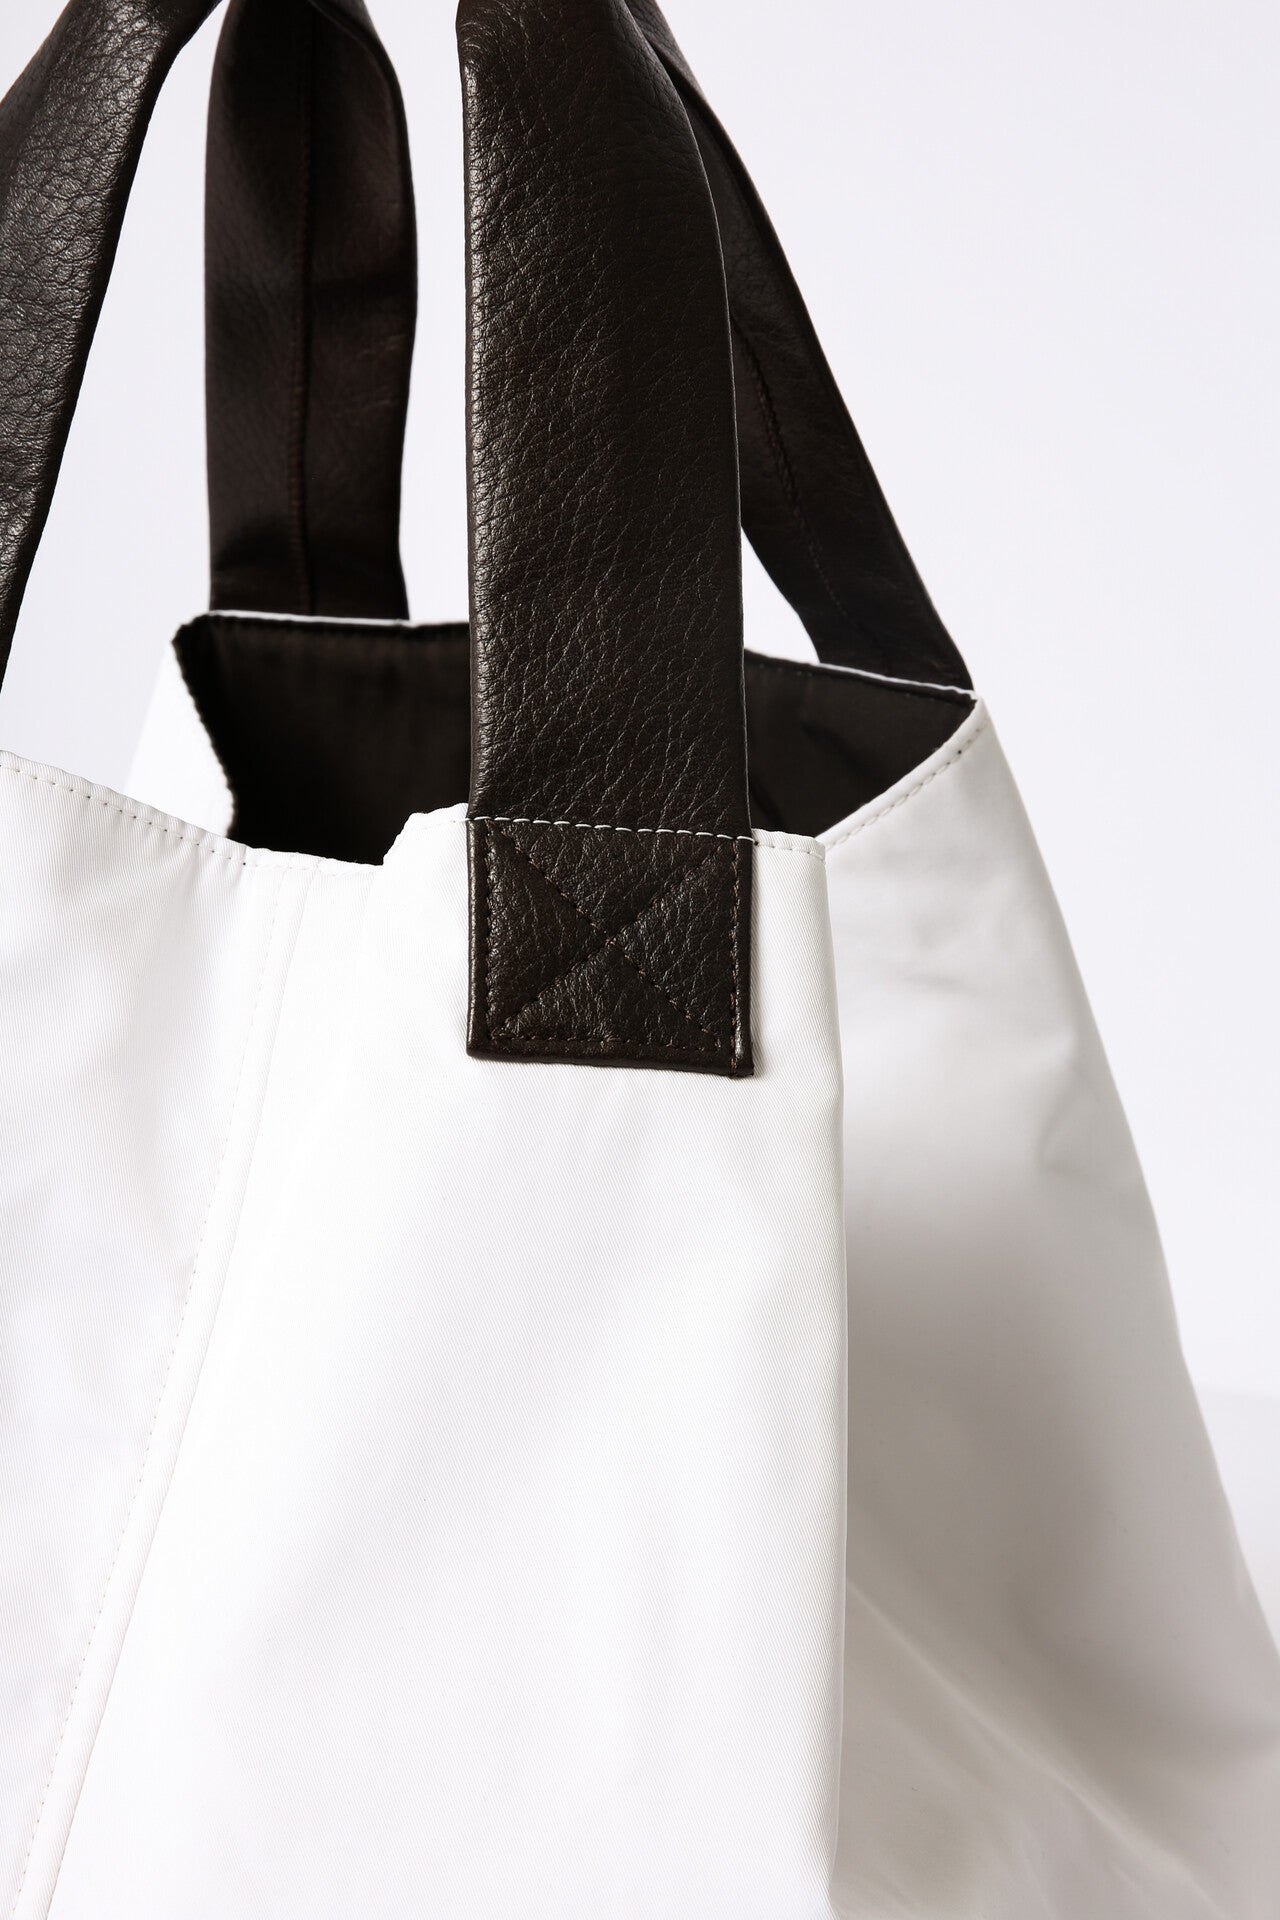 Reversible Shopping Tote in White